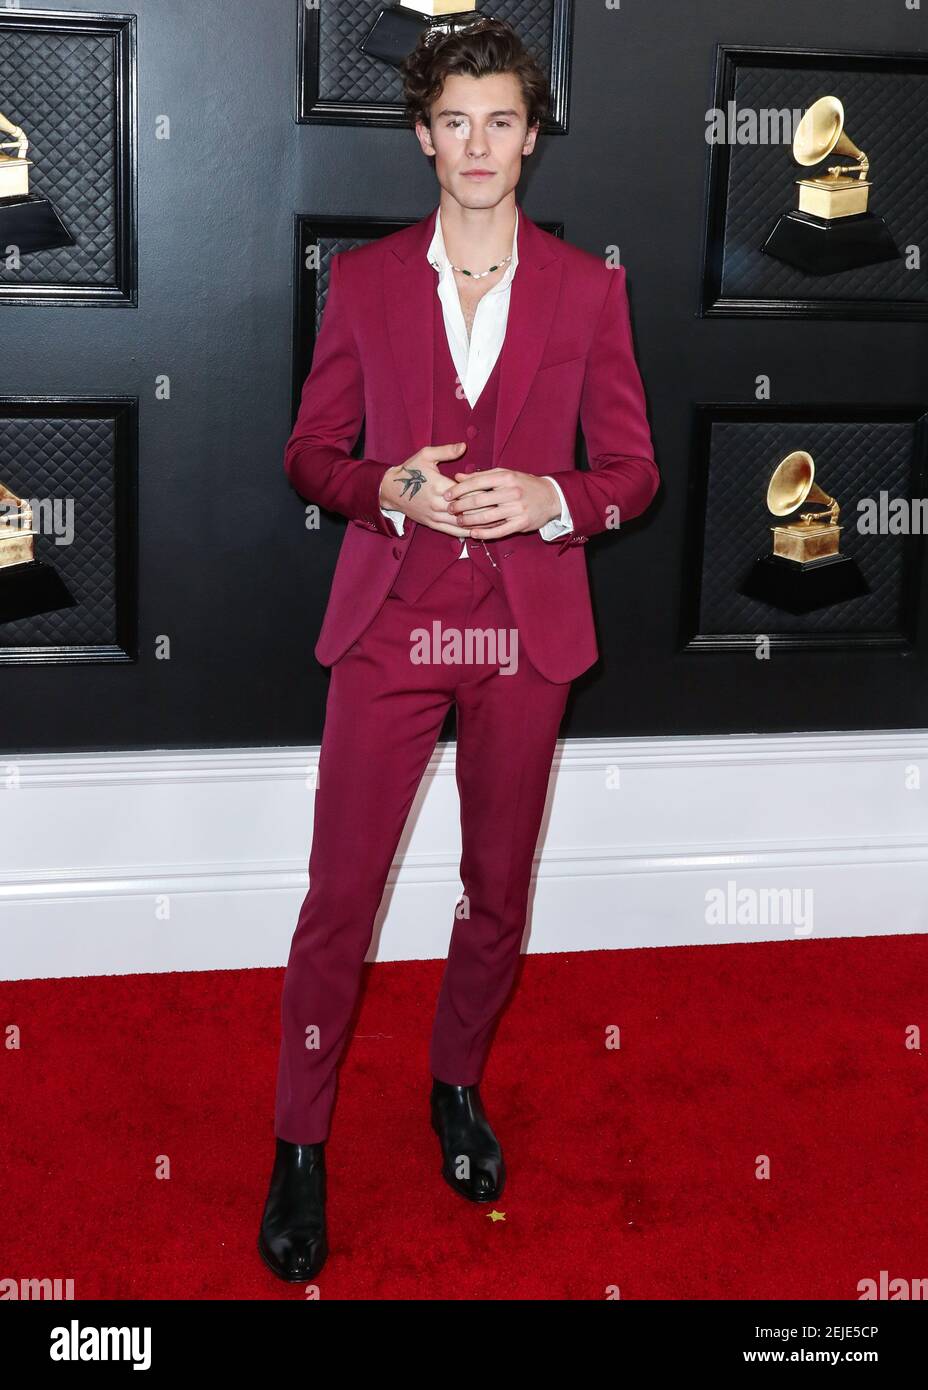 LOS ANGELES, CALIFORNIA, USA - JANUARY 26: Singer Shawn Mendes wearing a Louis  Vuitton suit and Bvlgari jewelry arrives at the 62nd Annual GRAMMY Awards  held at Staples Center on January 26